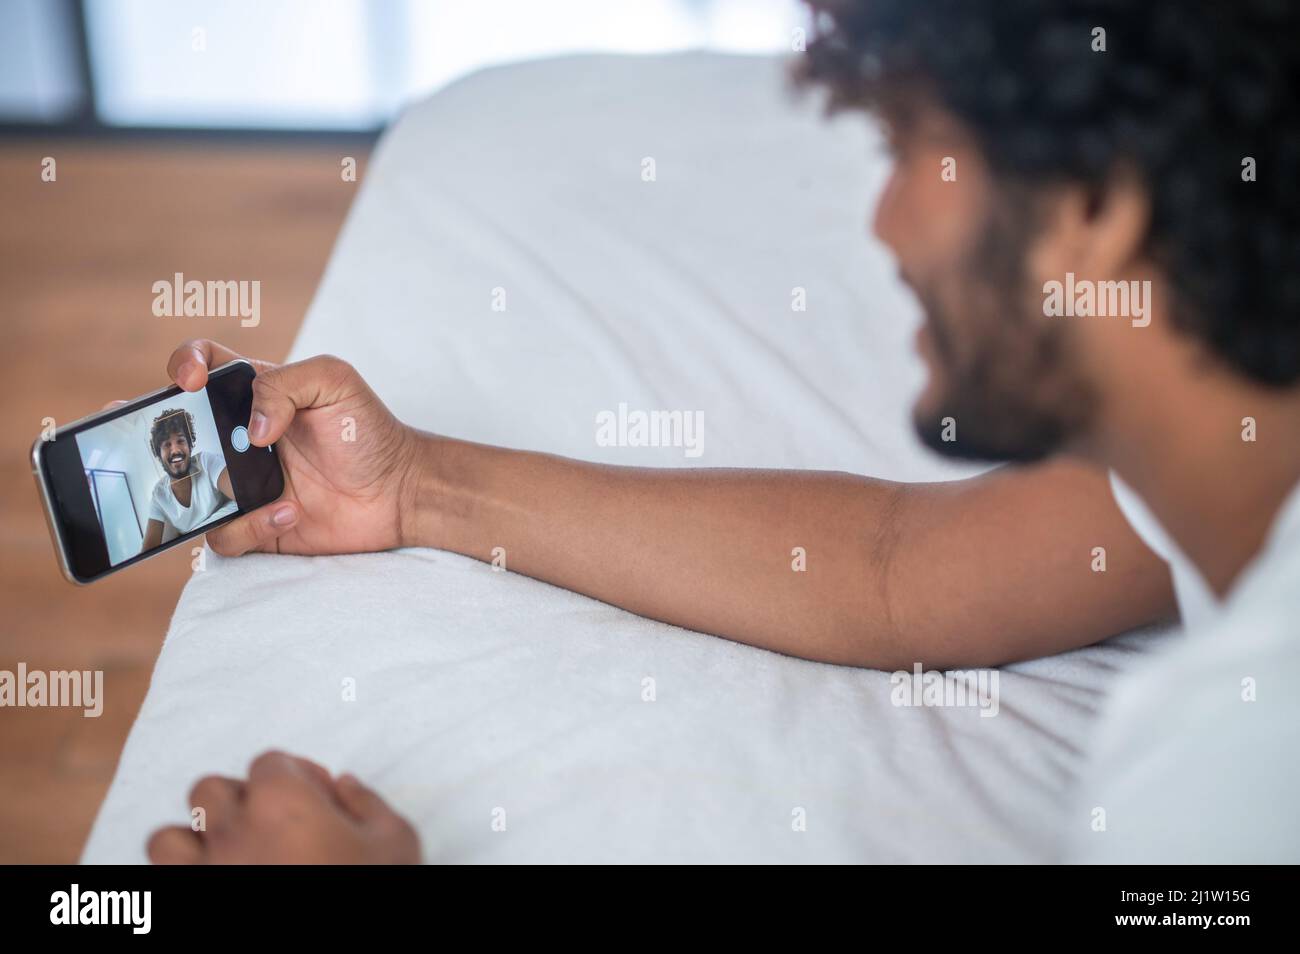 Male taking a selfie in the bedroom Stock Photo